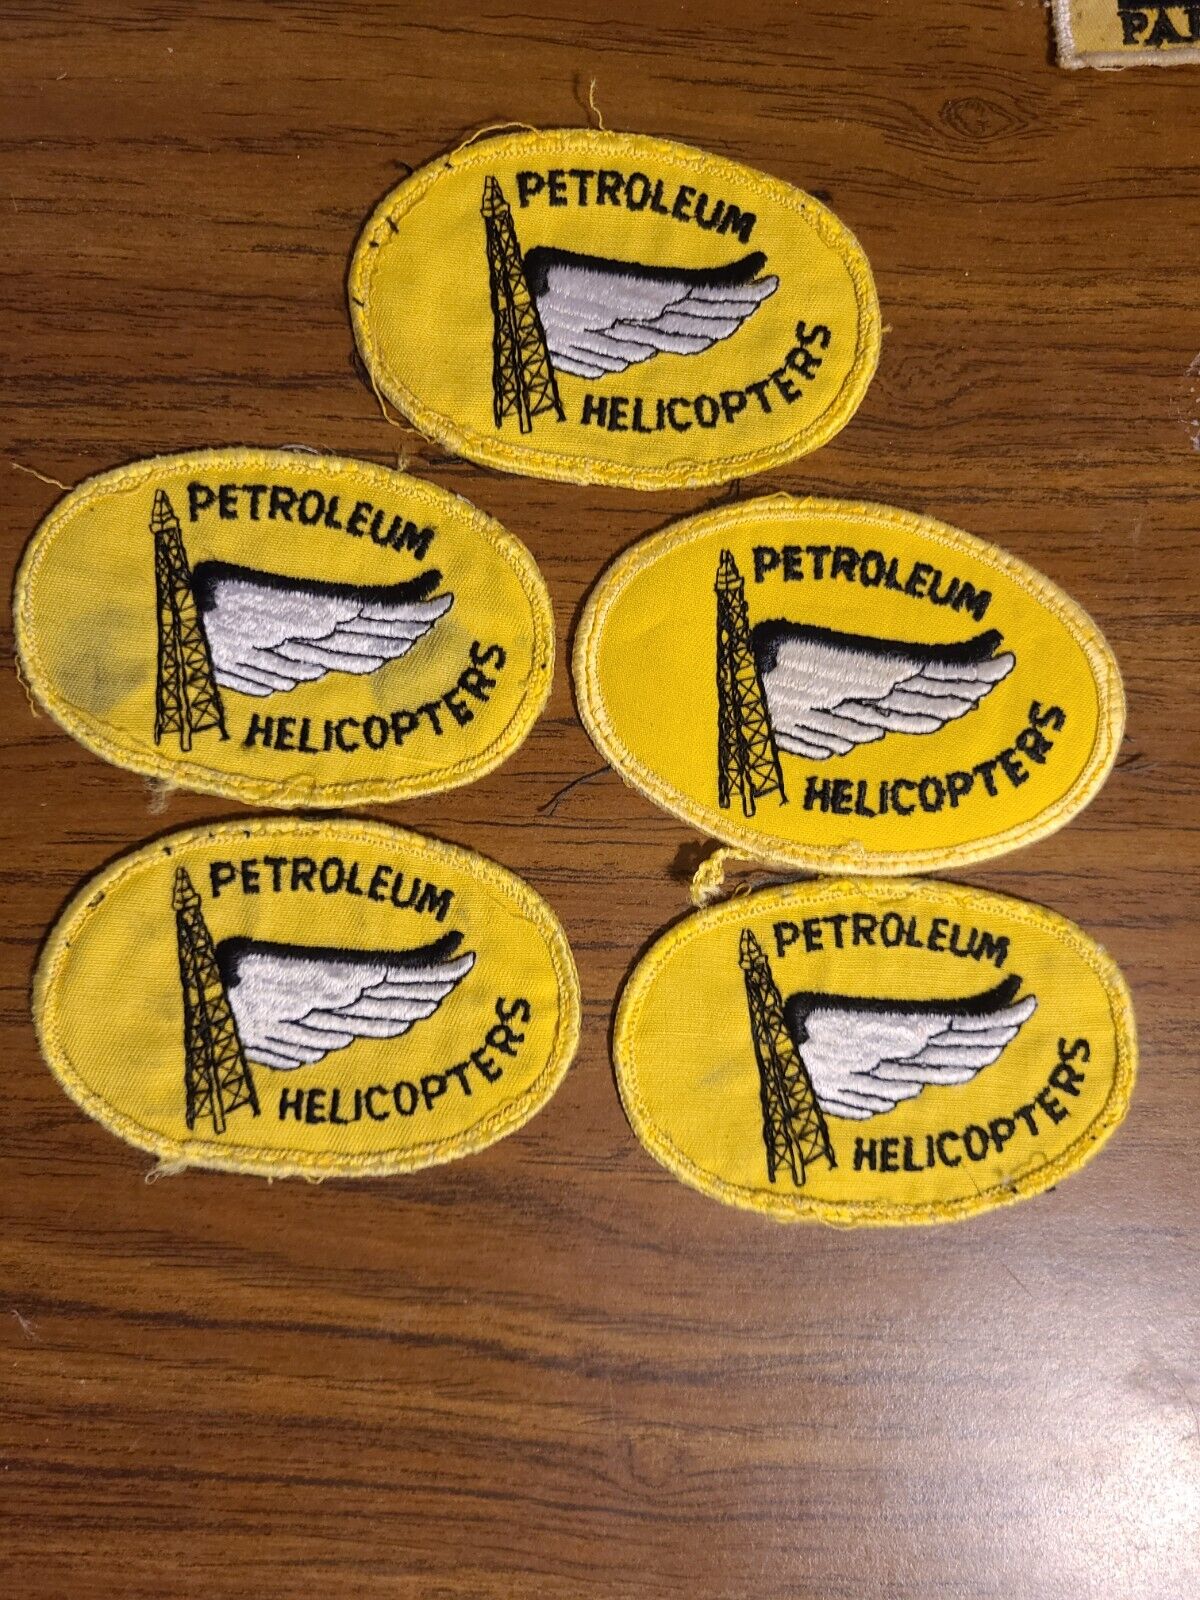 Petroleum Helicopters Yellow Embroidered Patch Badge lot of 5